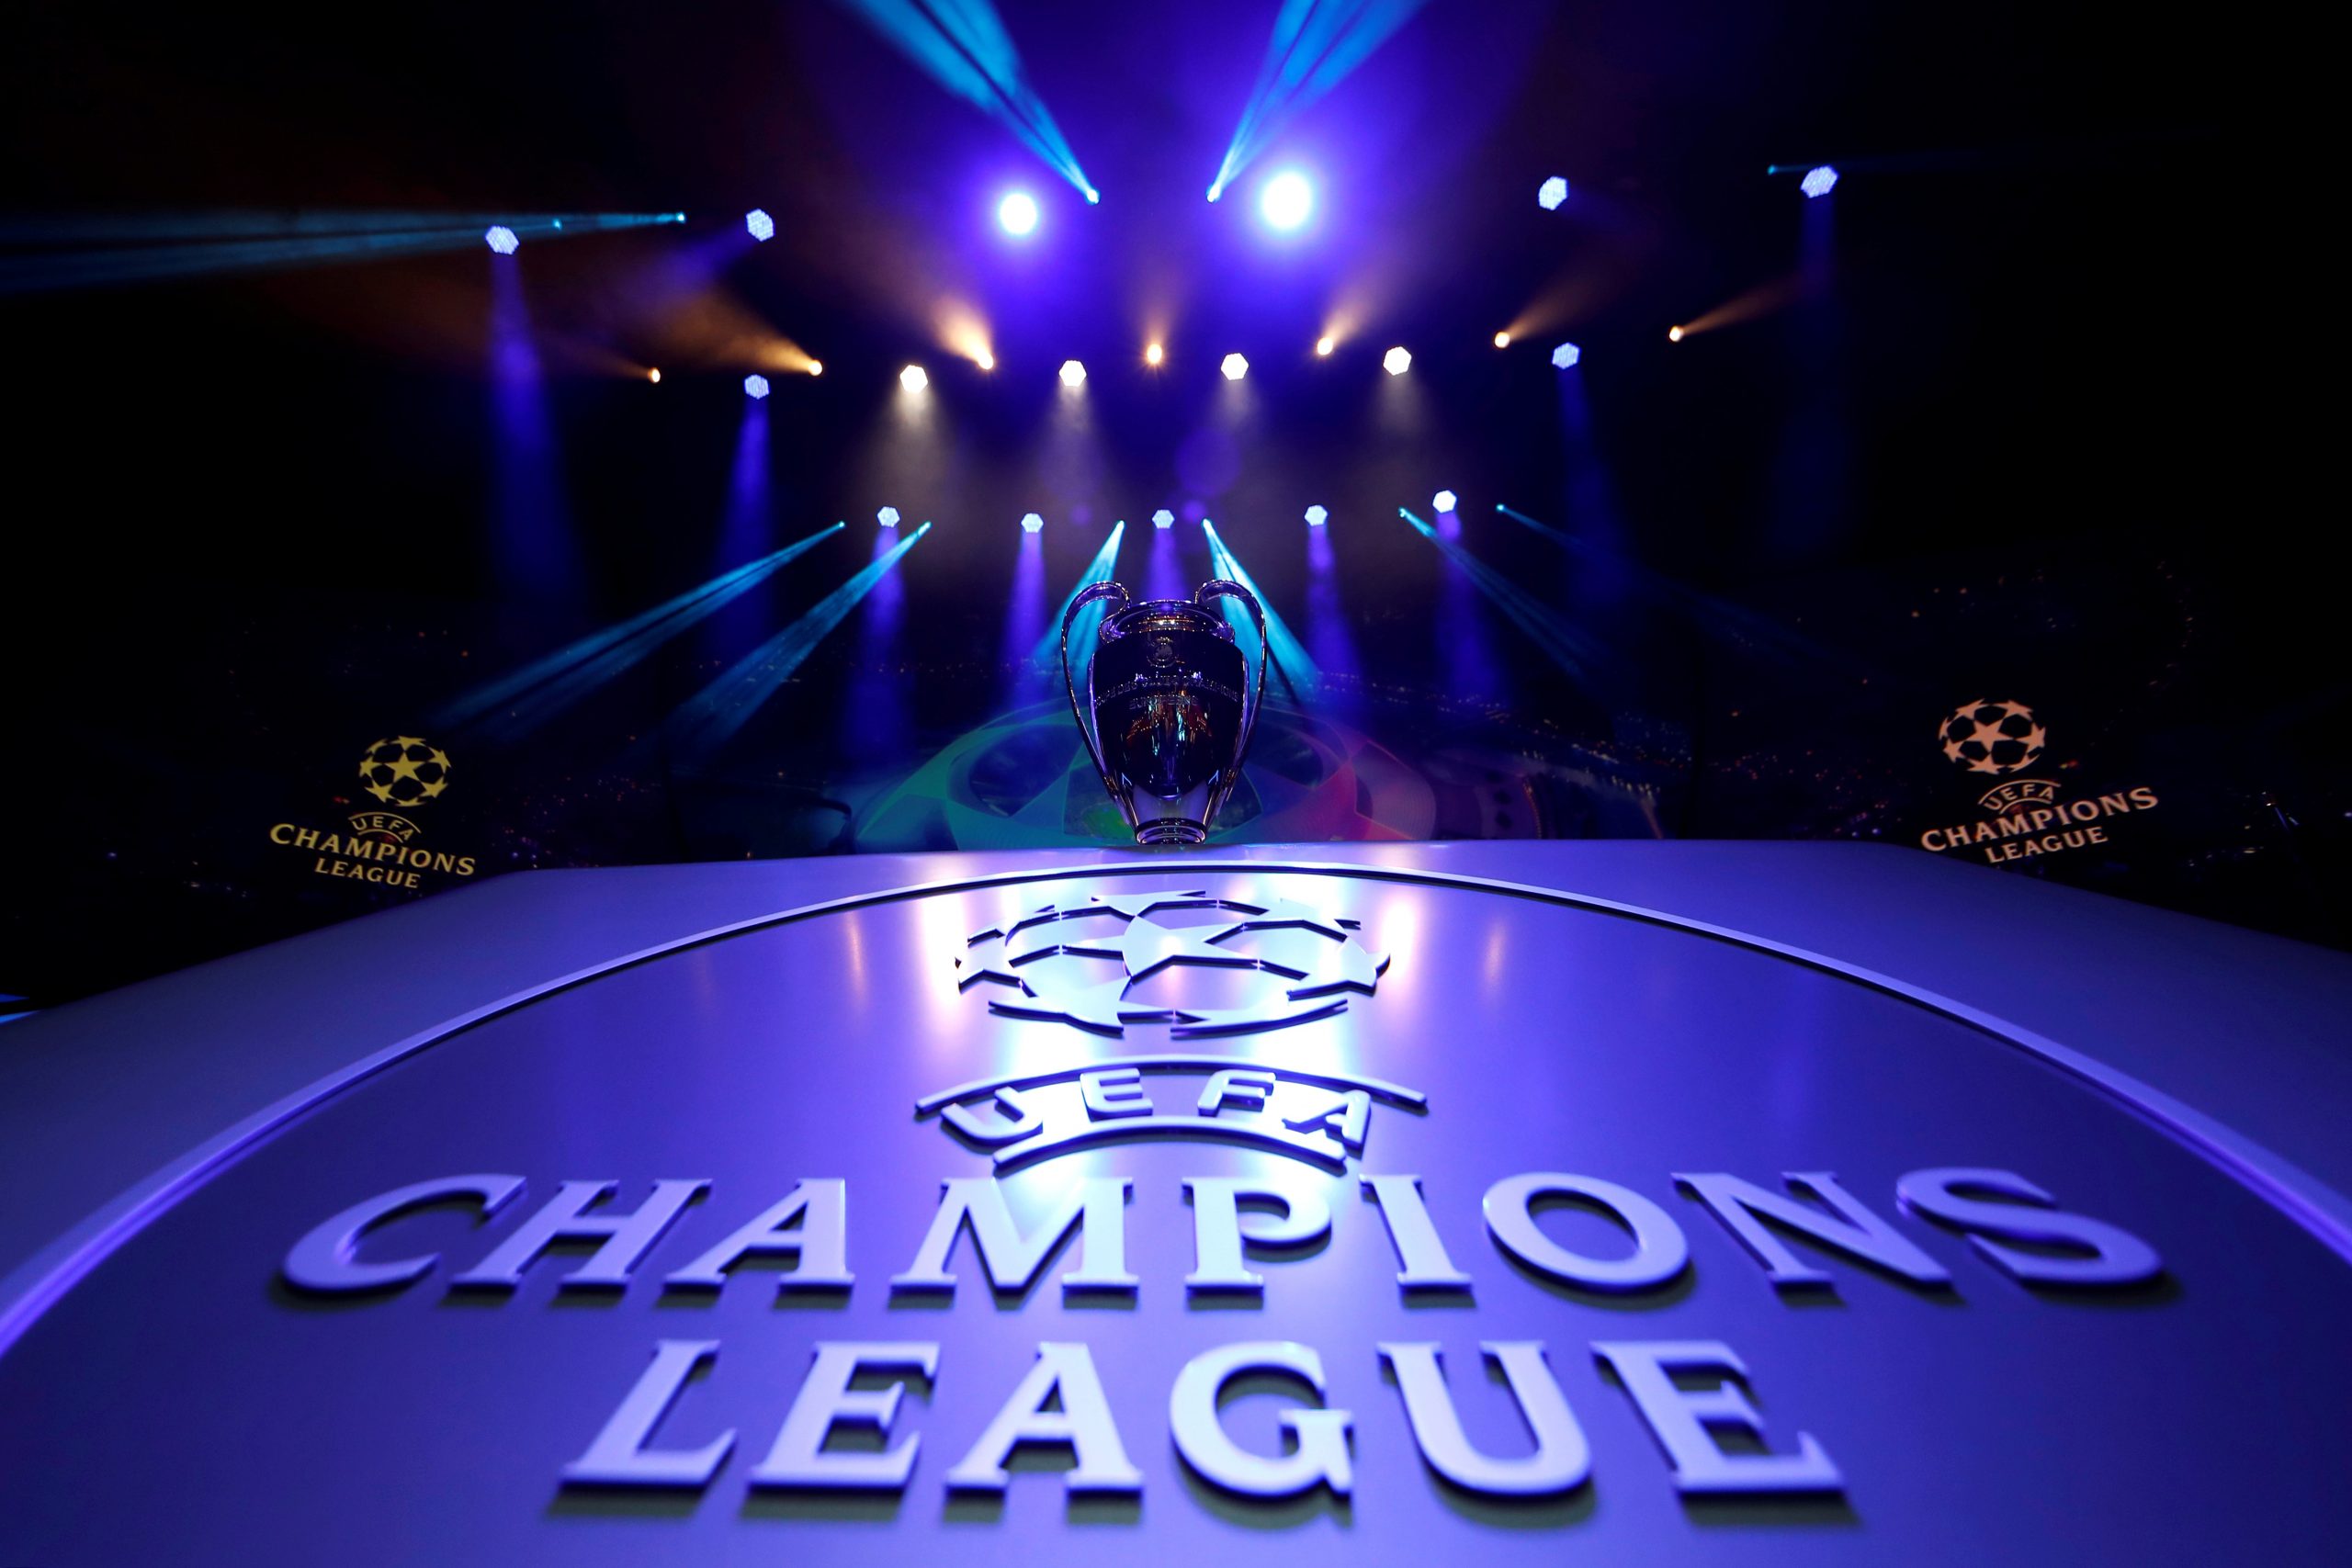 FILE PHOTO: Champions League Group Stage draw FILE PHOTO: Soccer Football - Champions League Group Stage draw - Grimaldi Forum, Monaco - August 29, 2019   General view of the Champions League trophy on display before the draw   REUTERS/Eric Gaillard/File Photo Eric Gaillard